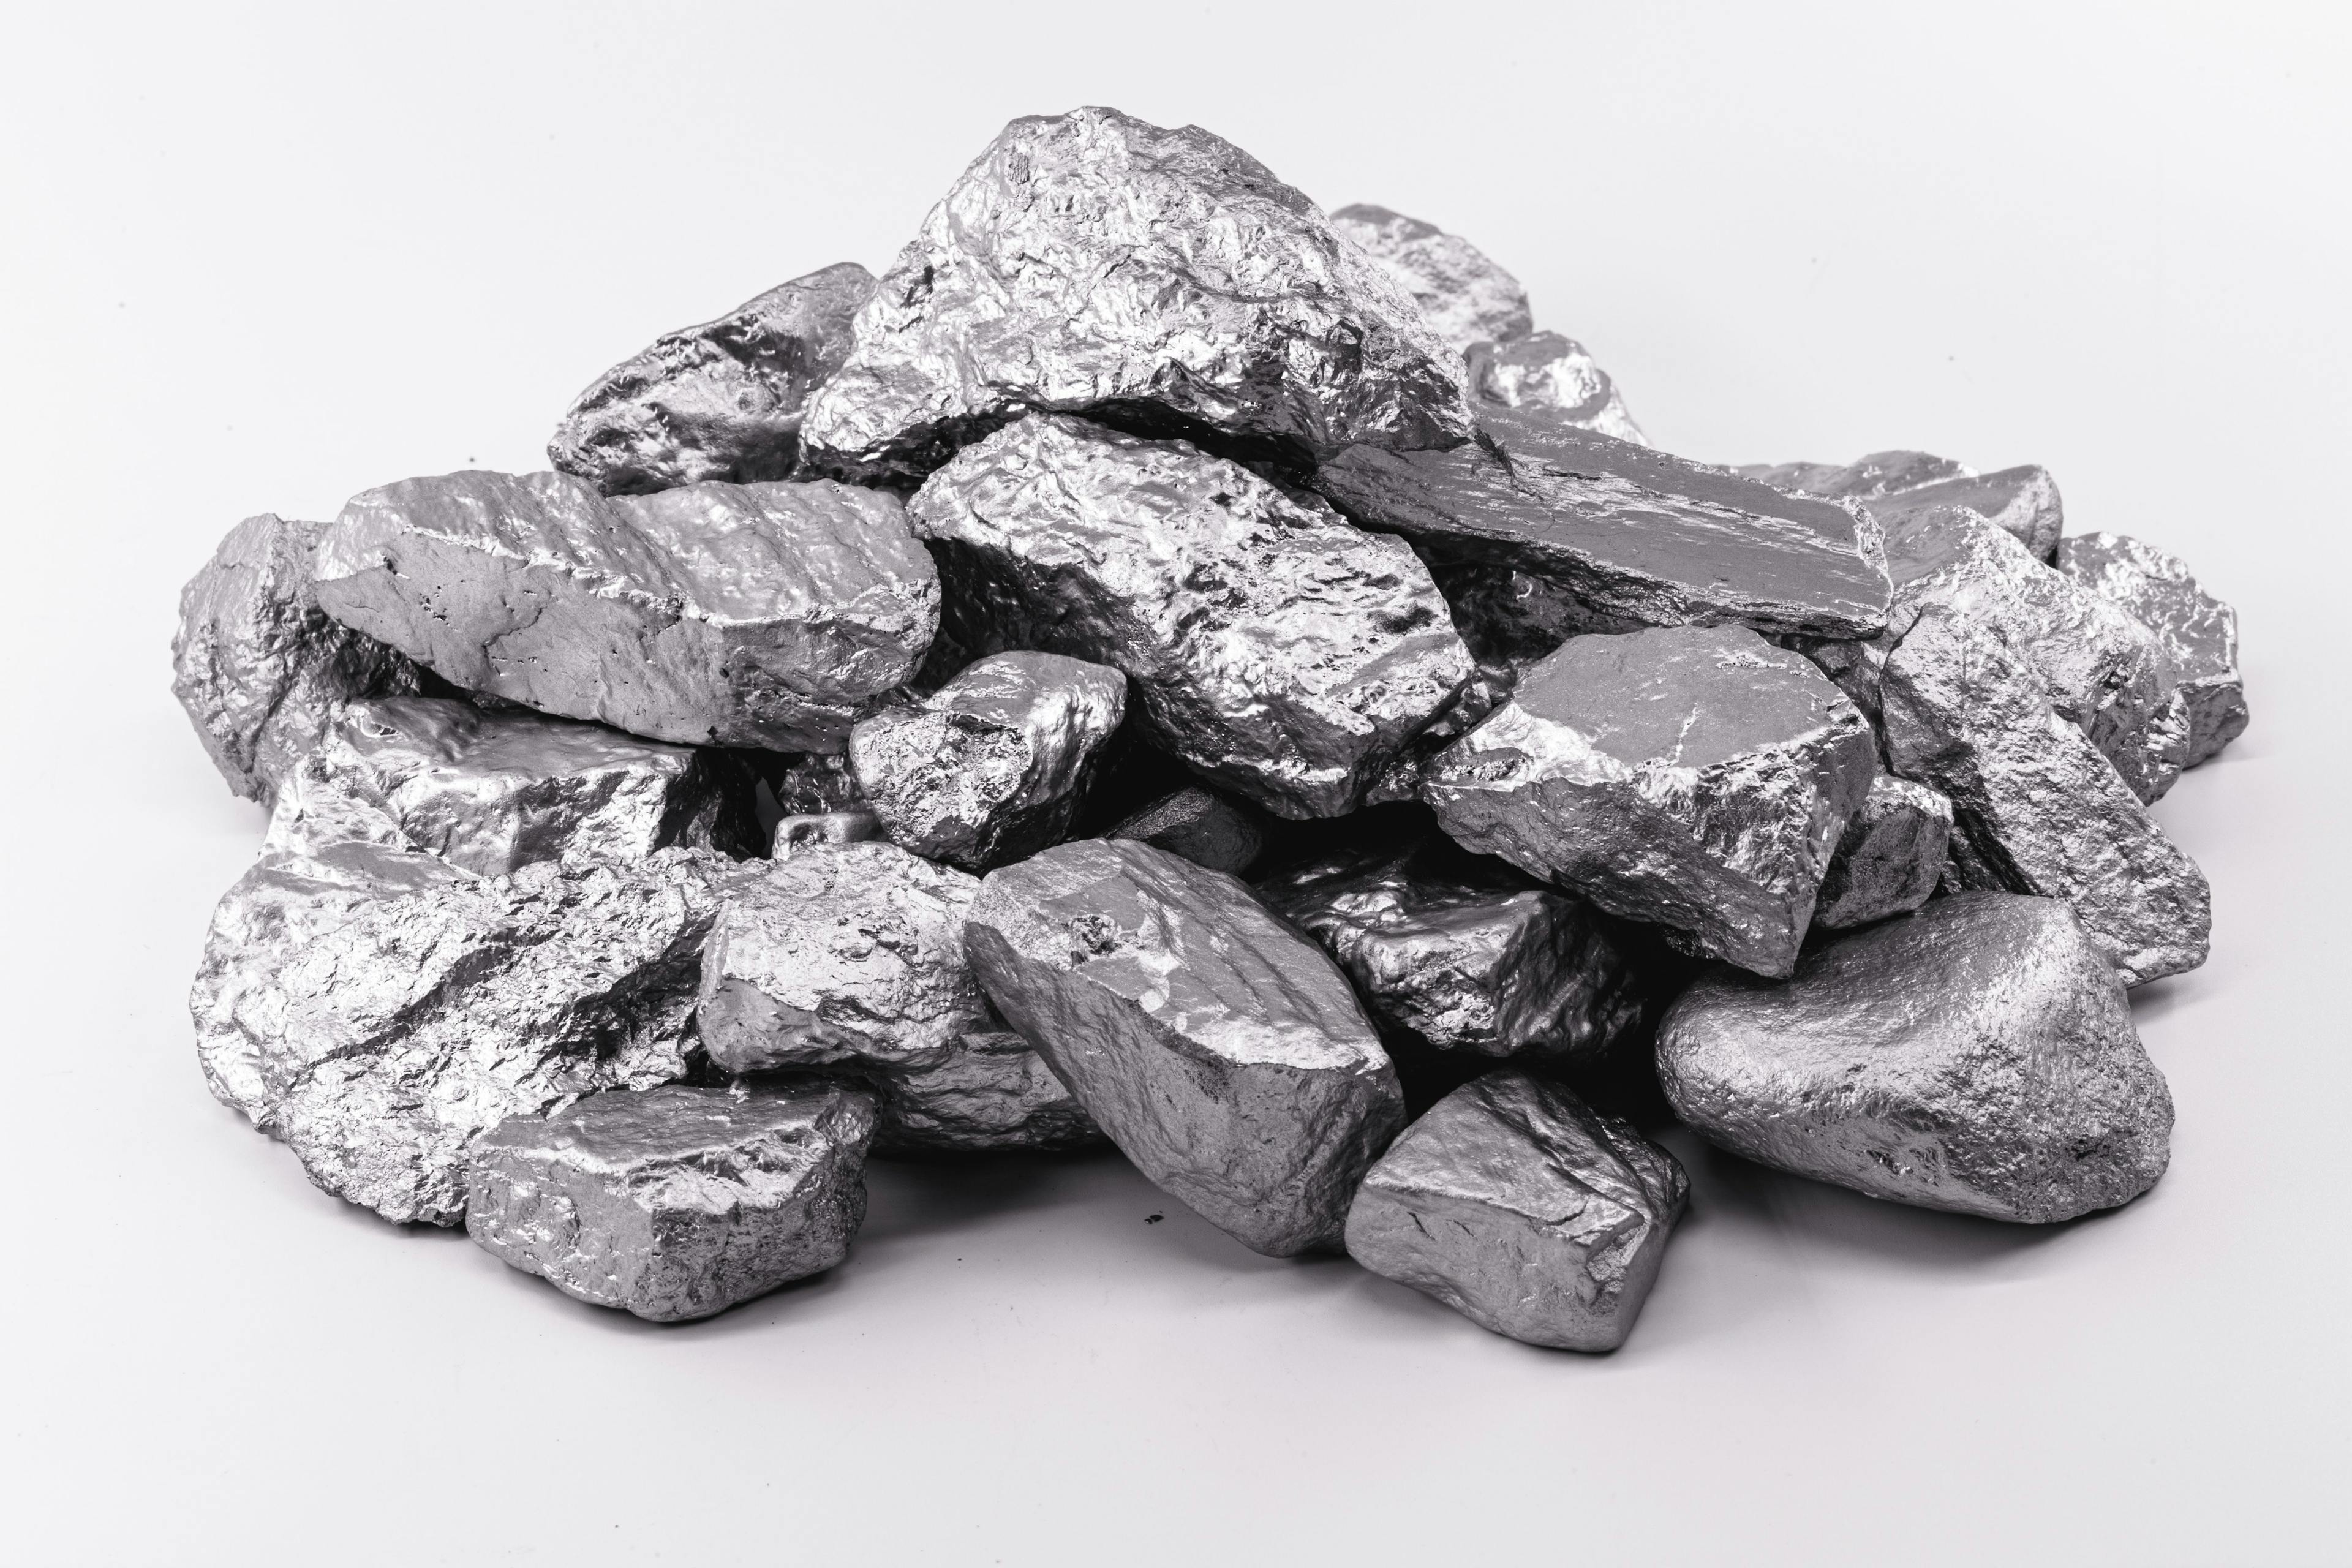 Molybdenite (Portugal) / molybdenite (Brazil) is a molybdenum disulfide mineral, with the chemical formula MoS2 | Image Credit: © RHJ - stock.adobe.com